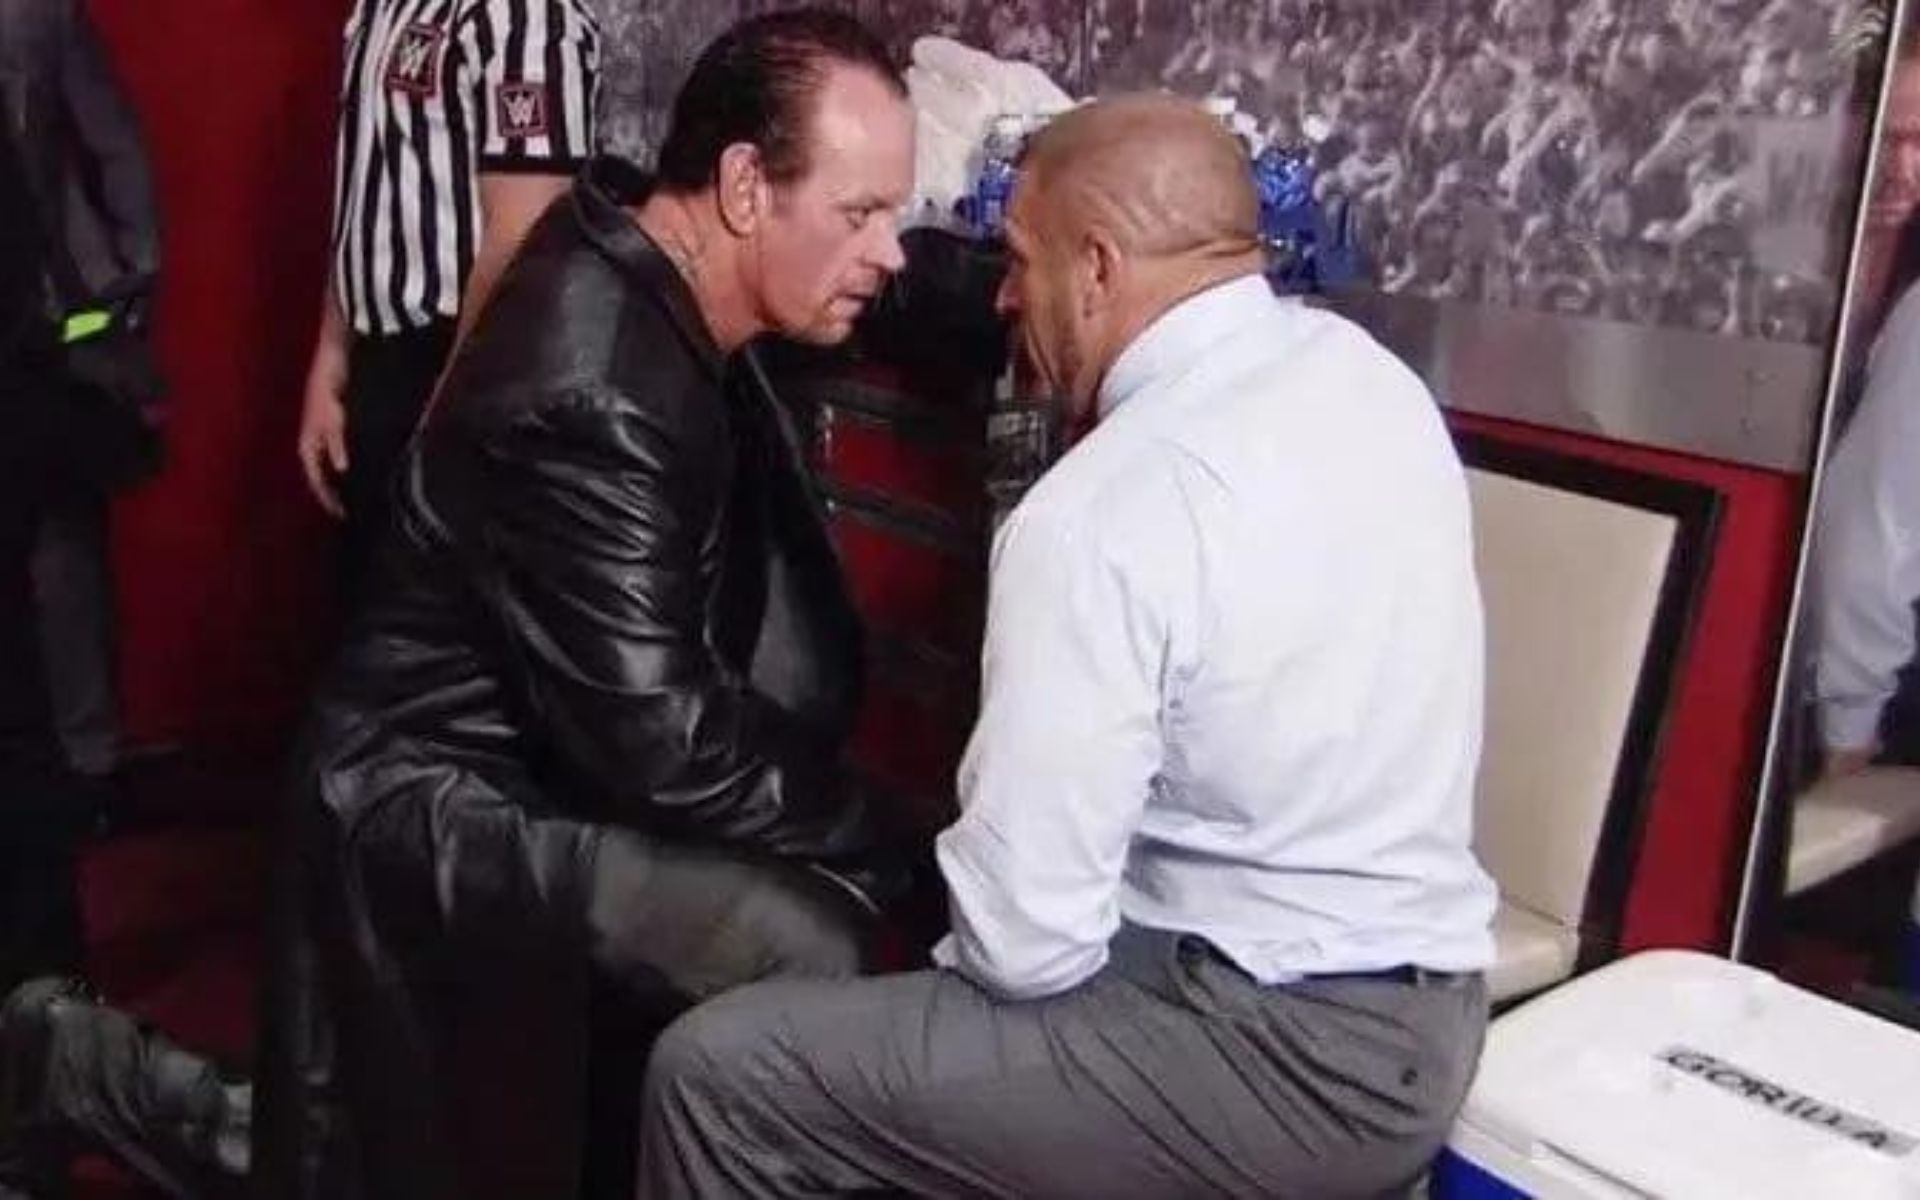 WWE legends, The Undertaker and Triple H